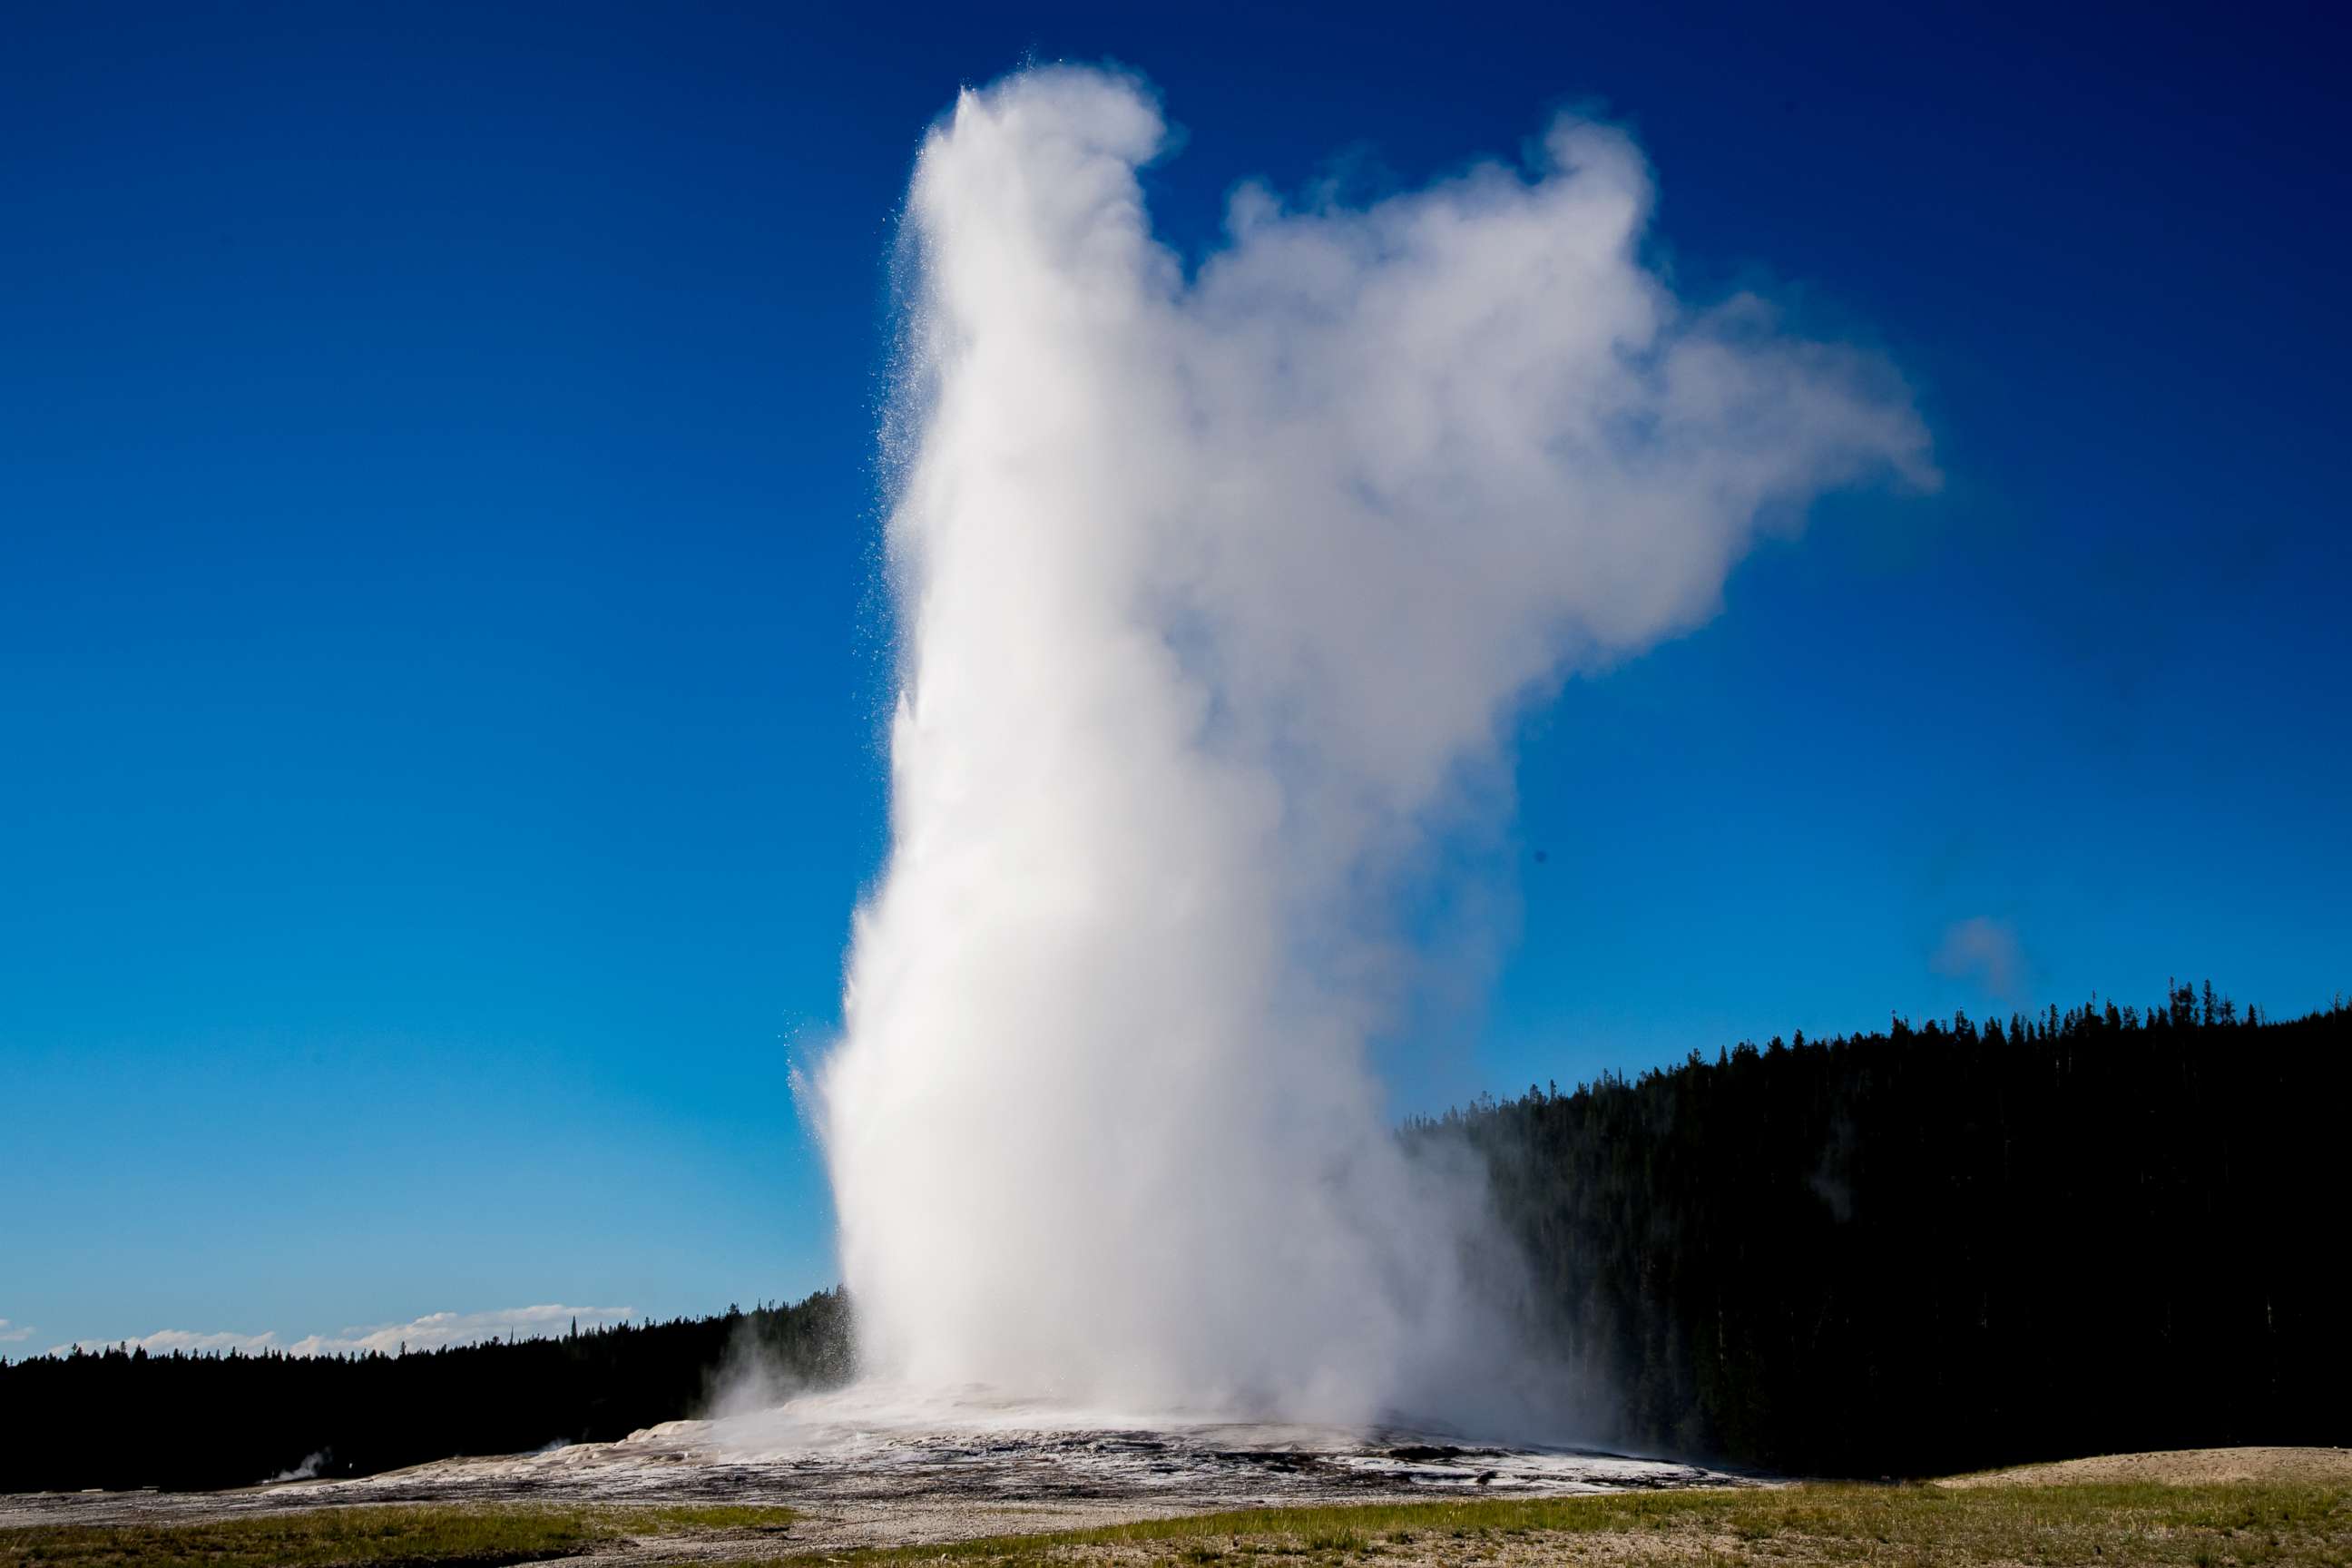 PHOTO: Old Faithful is seen in the Upper Geyser Basin, Yellowstone National Park in Wyoming.